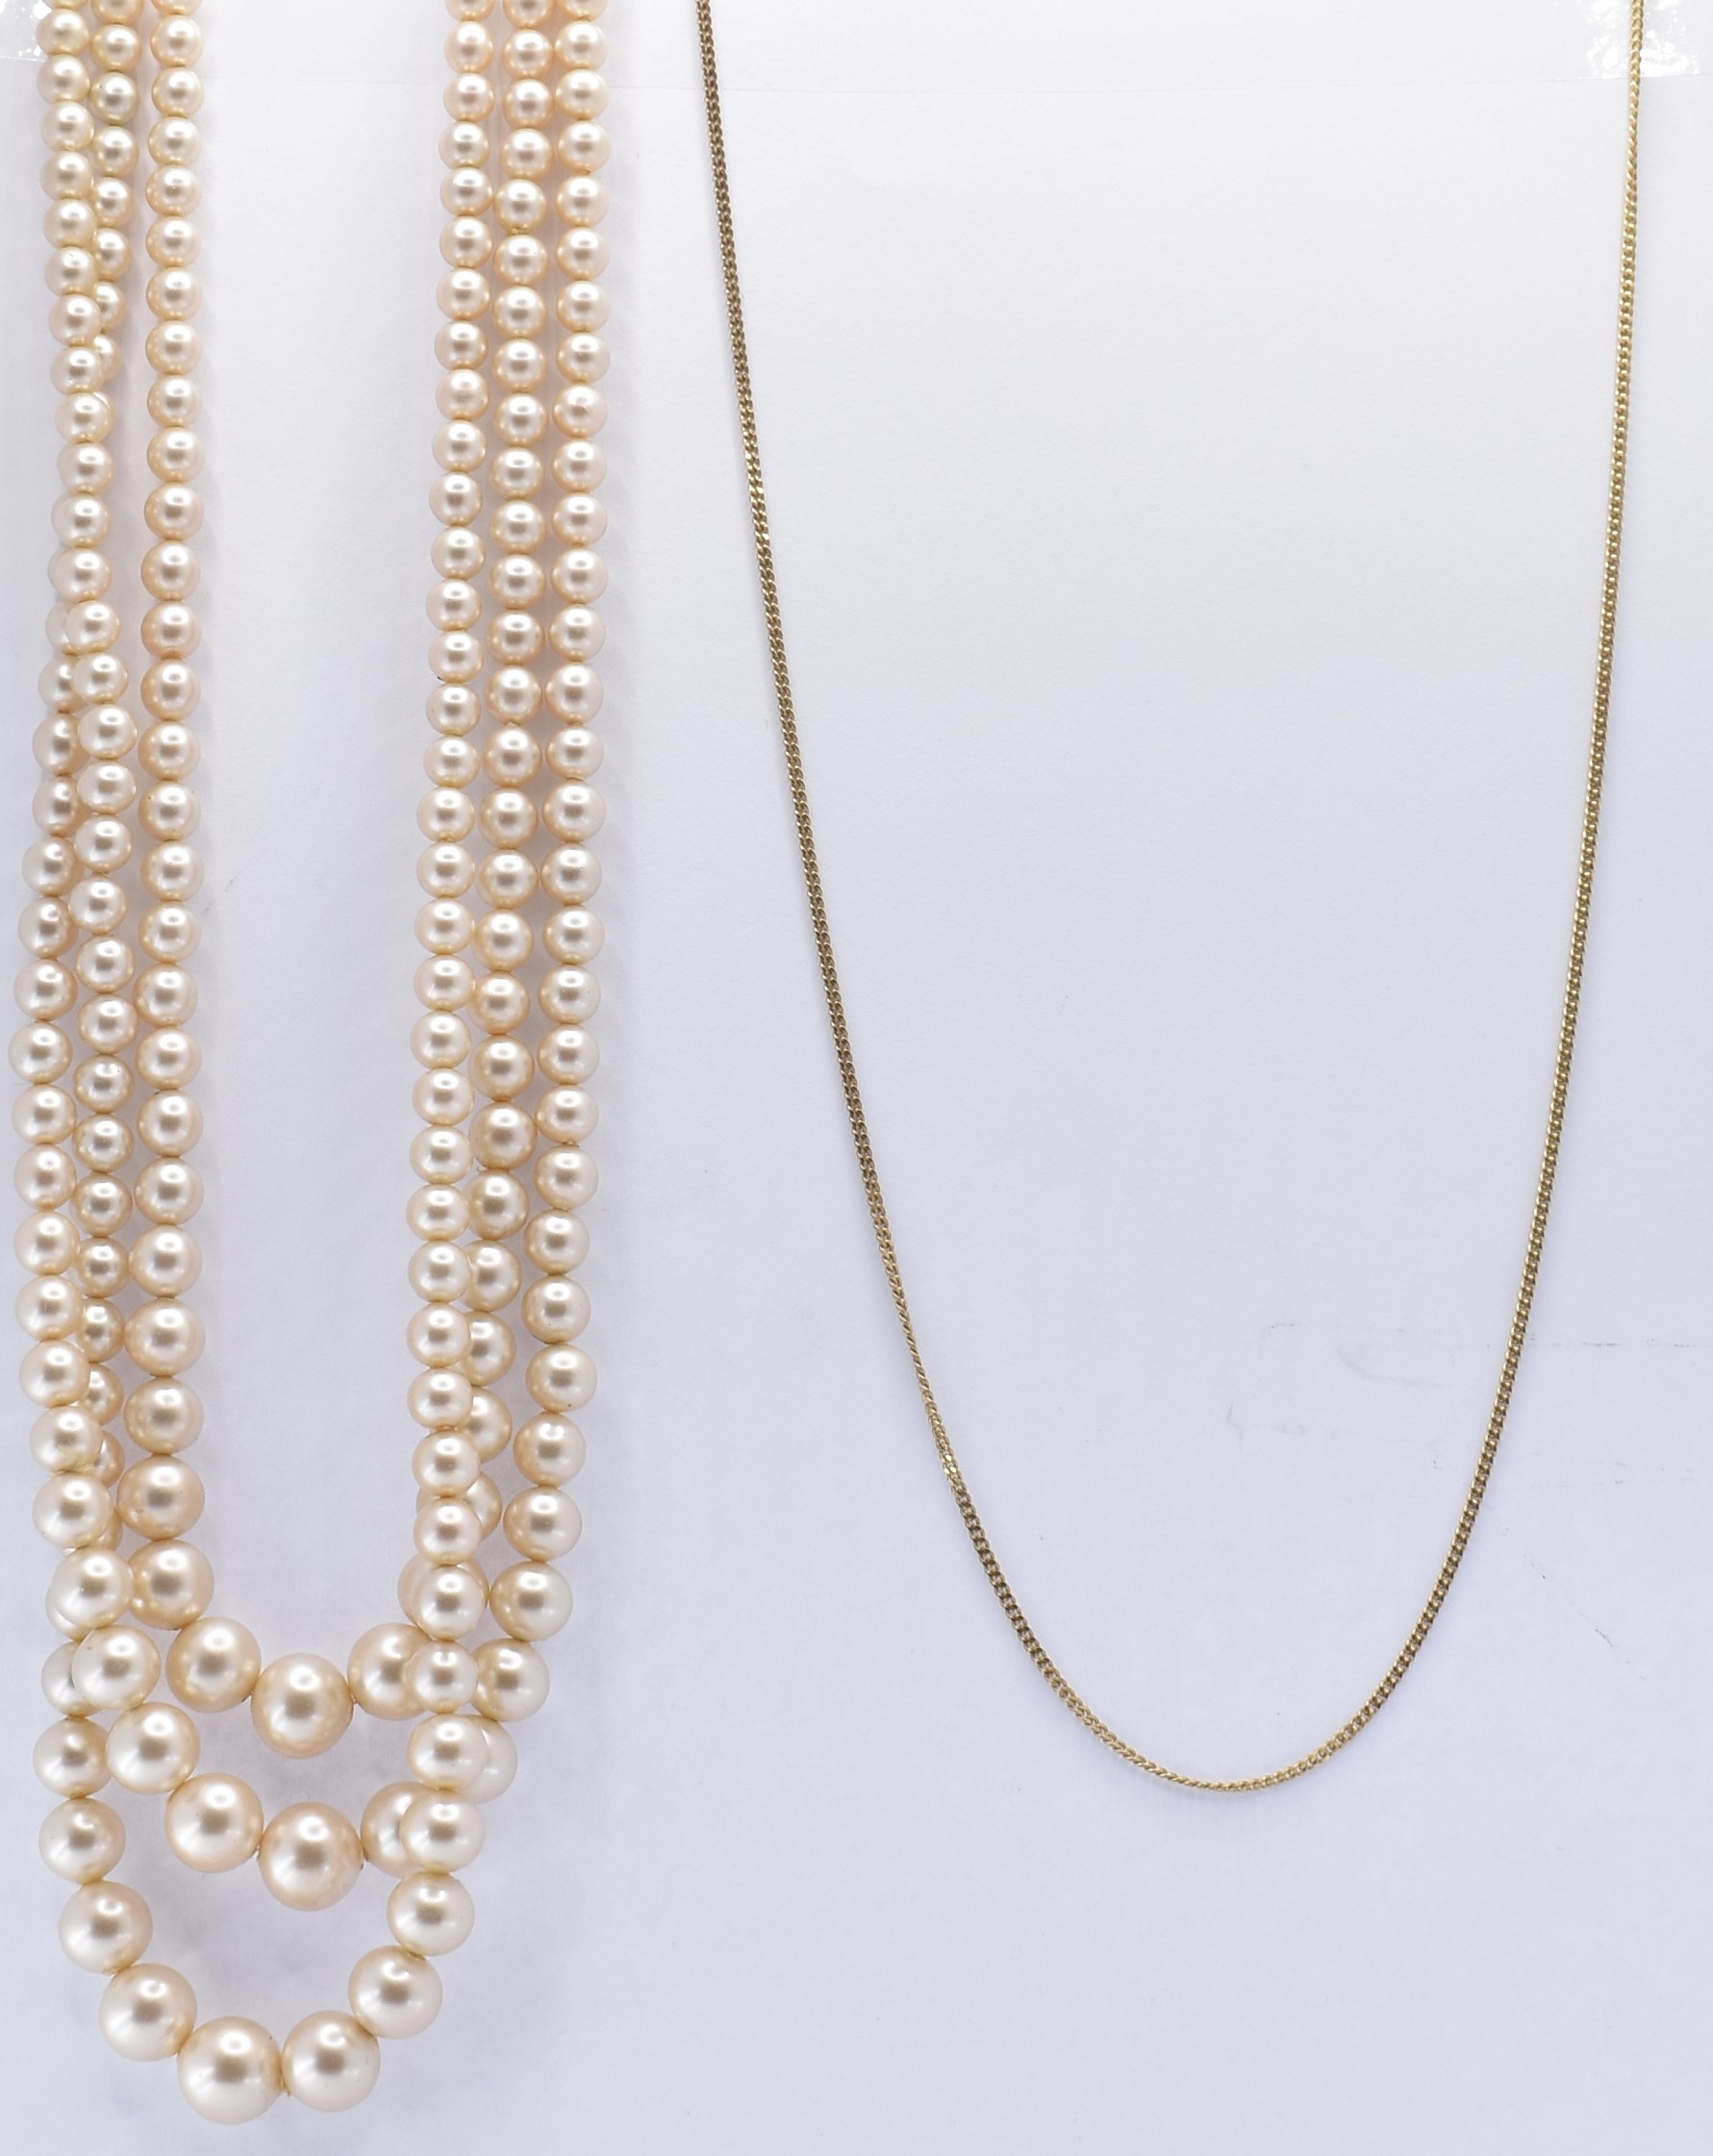 14CT GOLD NECKLACE CHAIN & CIRO PEARL NECKLACE